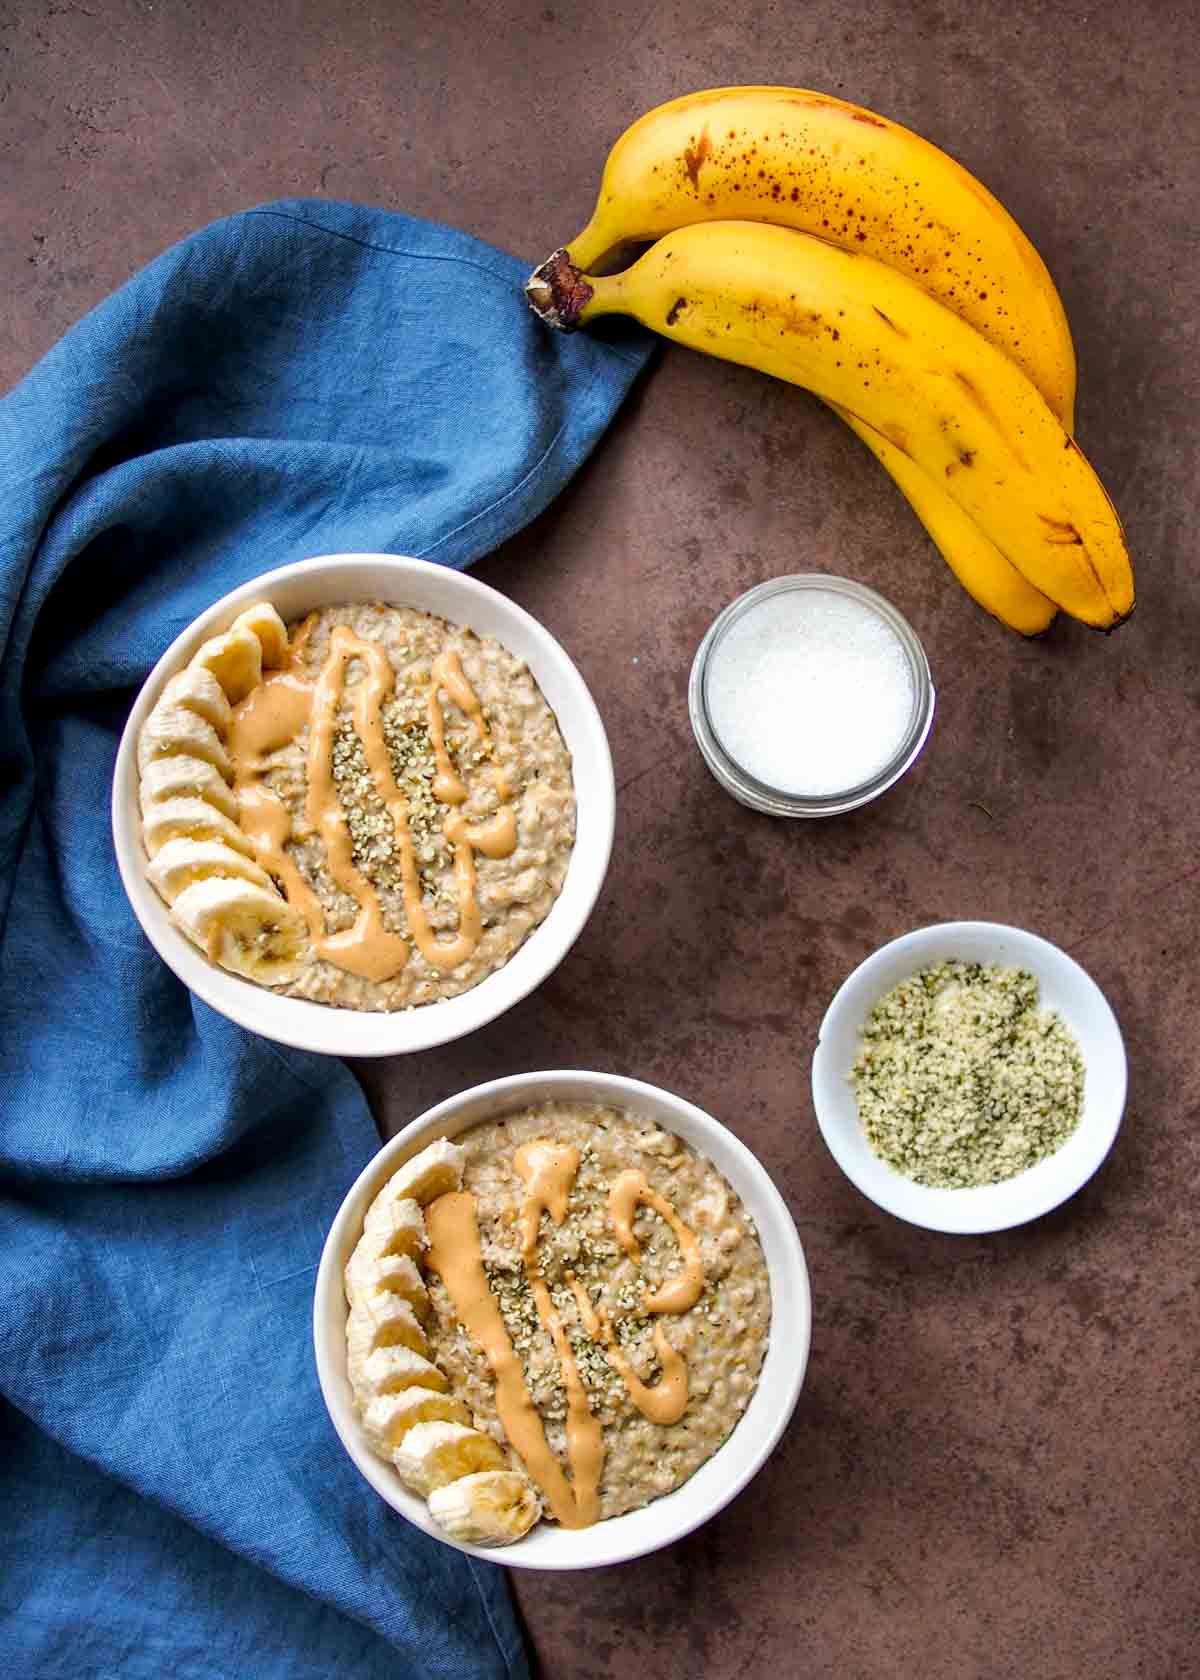 Two Bowls Of Steel-Cut Oats with Drizzle Of Peanut Butter